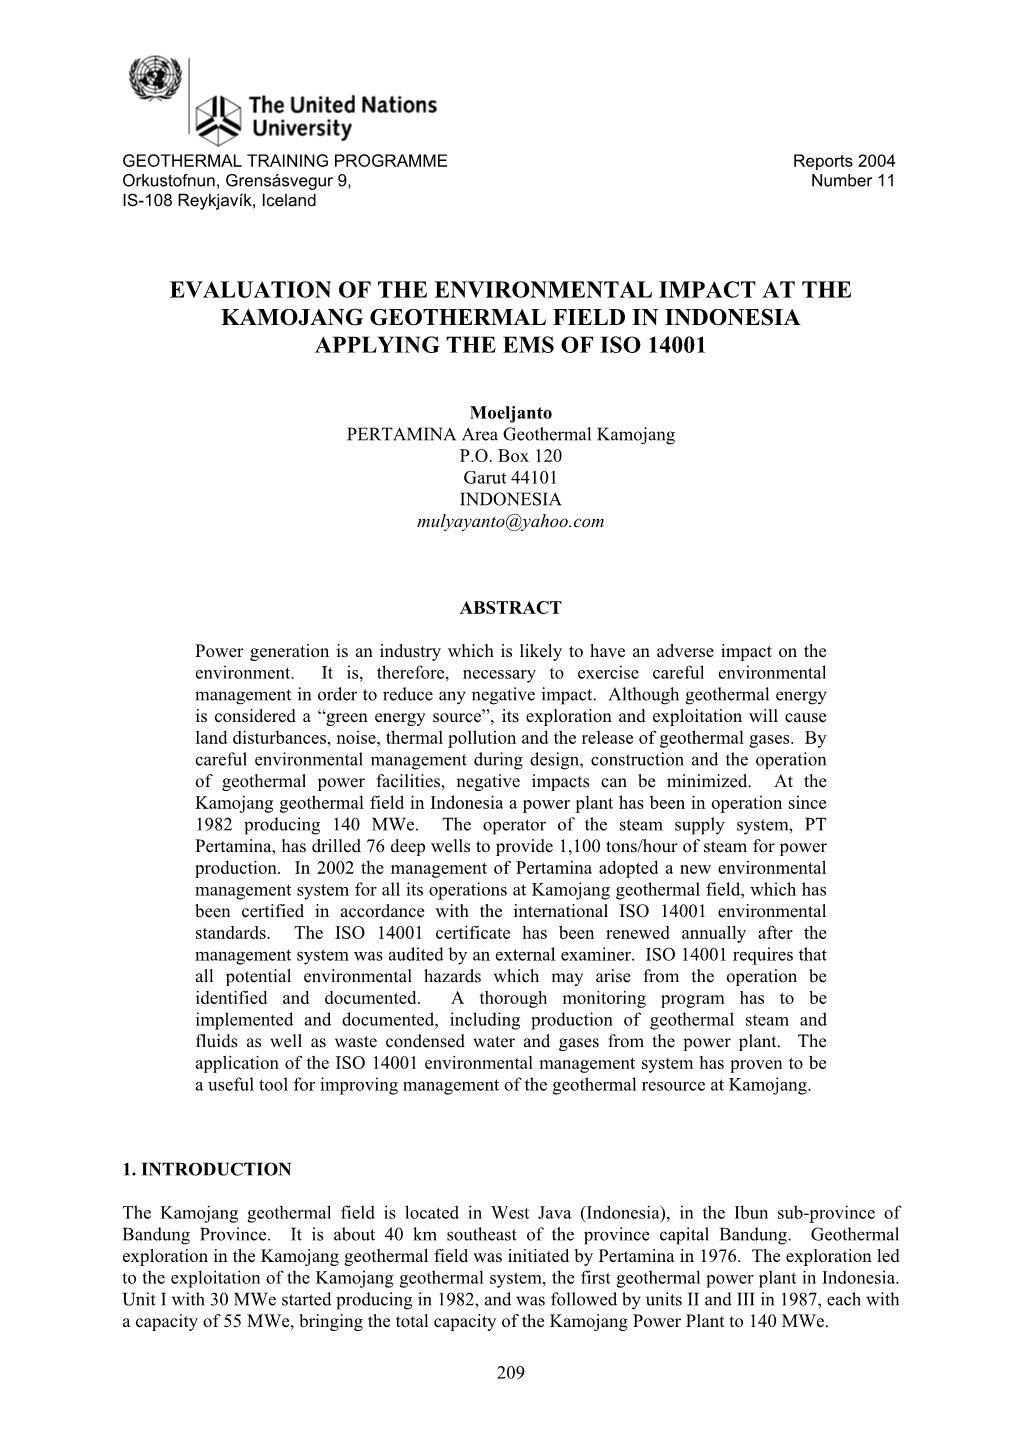 Evaluation of the Environmental Impact at the Kamojang Geothermal Field in Indonesia Applying the Ems of Iso 14001